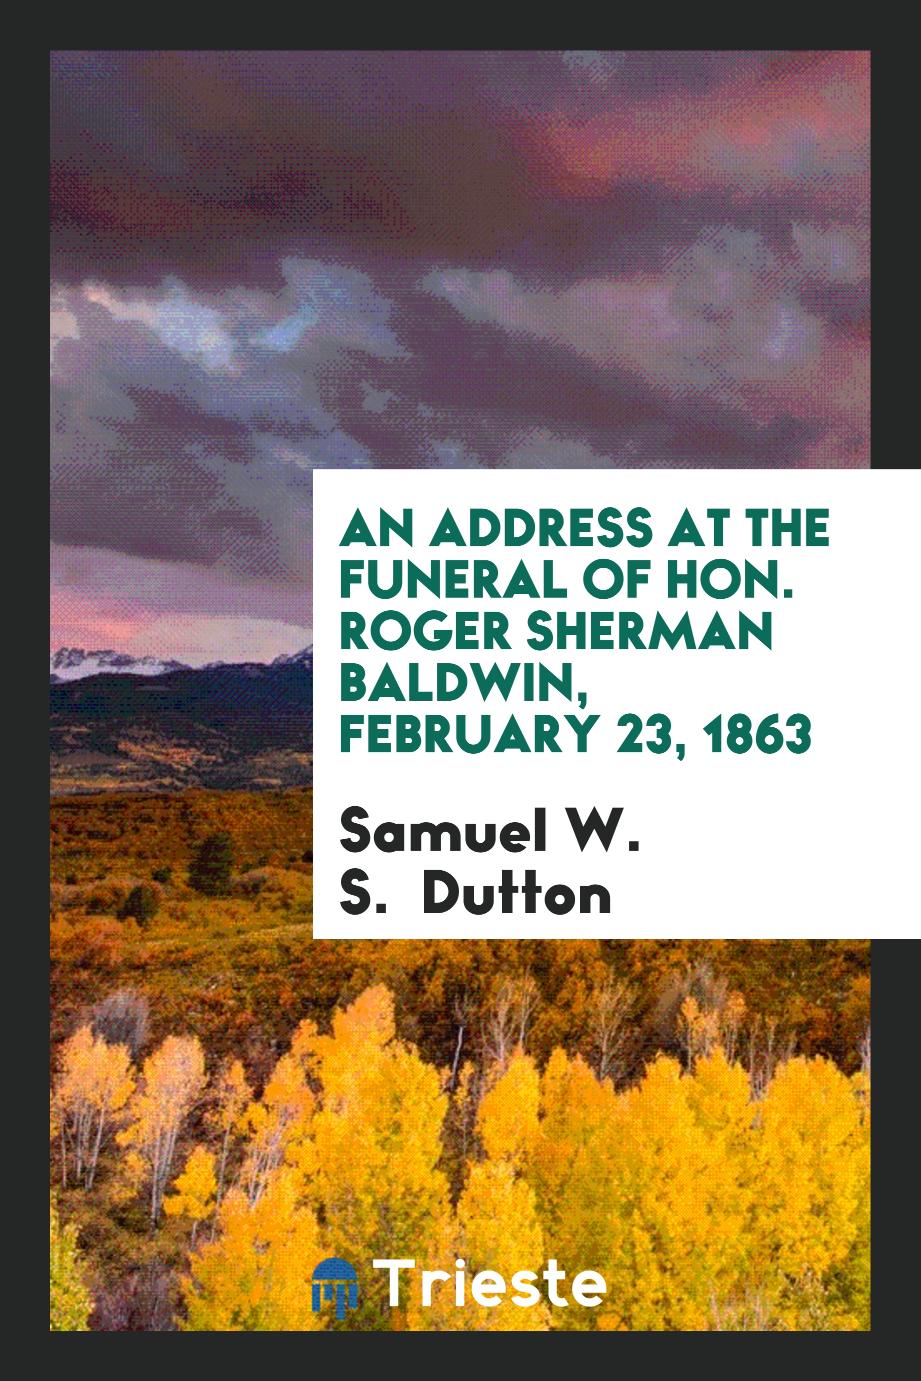 An Address at the Funeral of Hon. Roger Sherman Baldwin, February 23, 1863